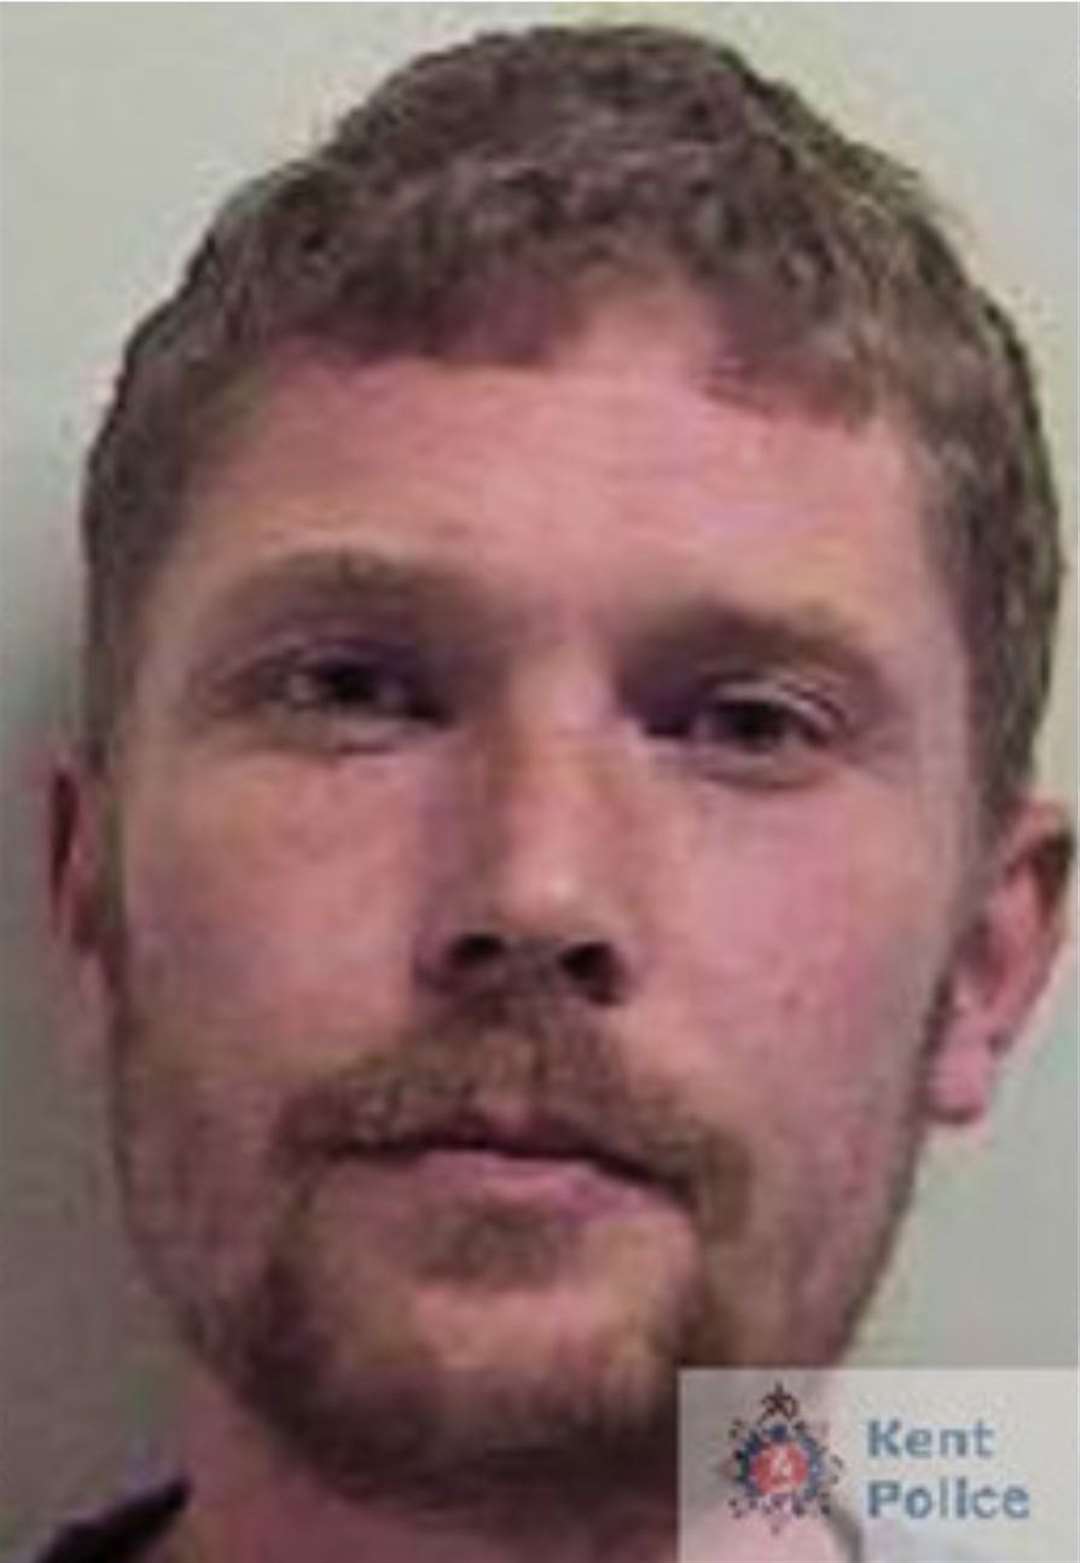 Stephen Ewens, 37, of Oak View, Edenbridge has been banned from most supermarkets in Kent. Picture: Kent Police